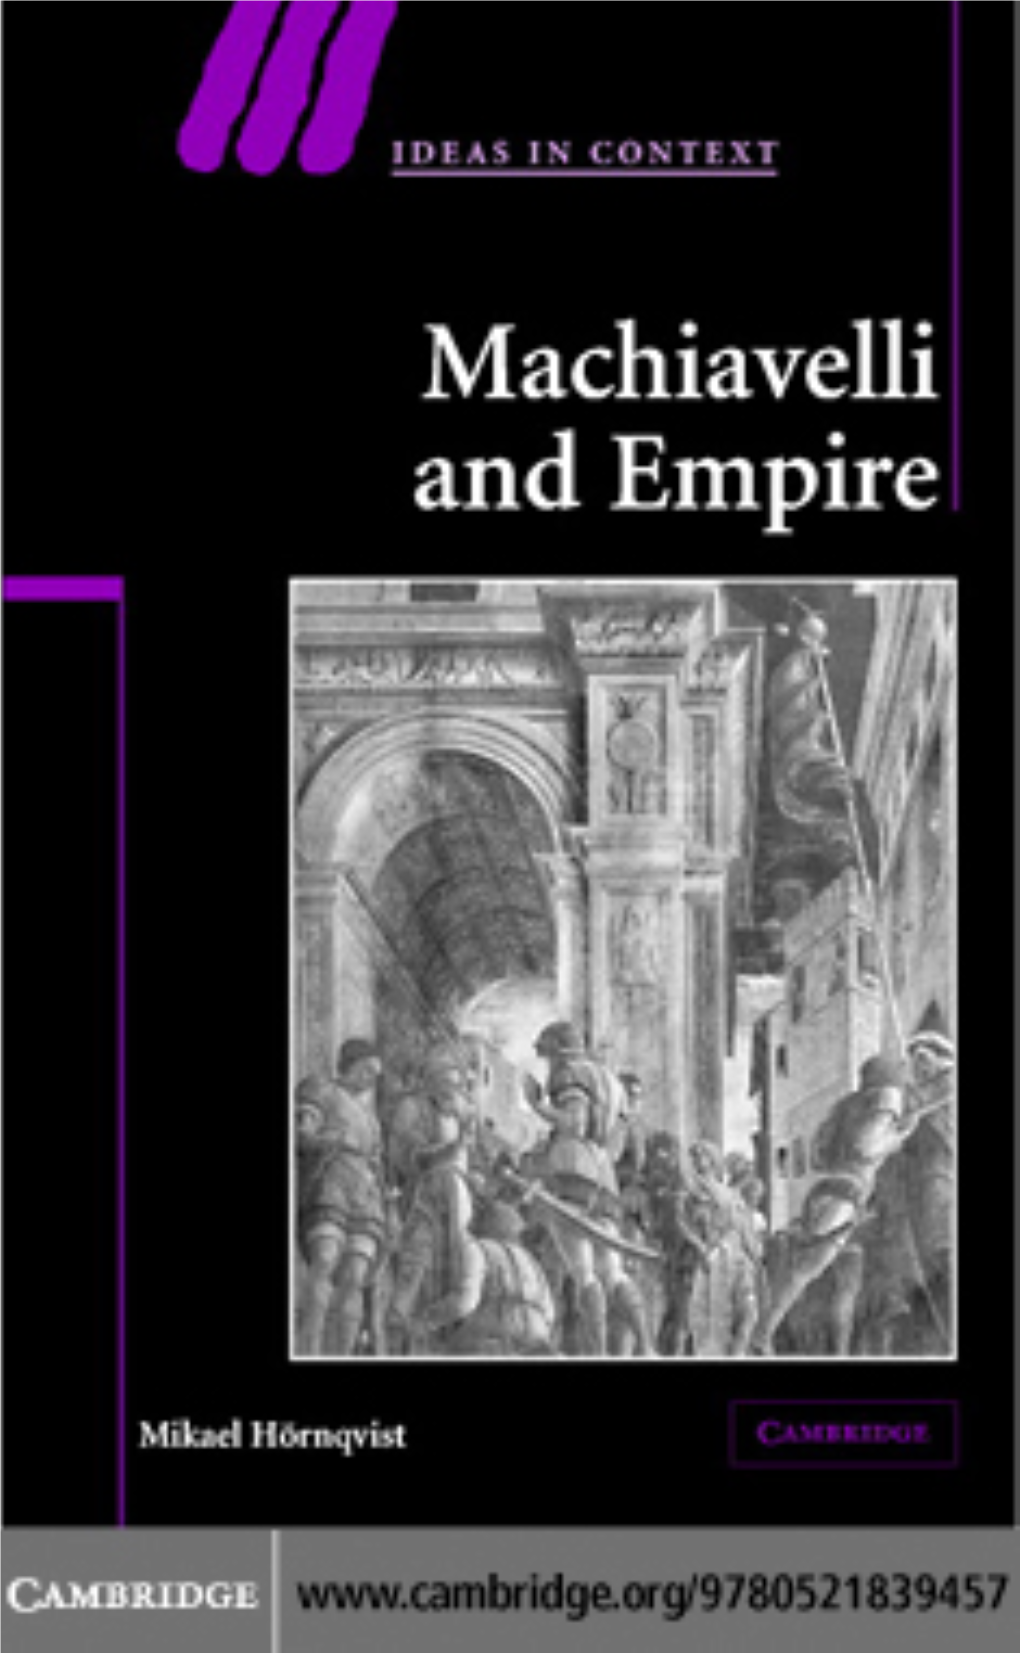 On the Use of Machiavelli's Texts